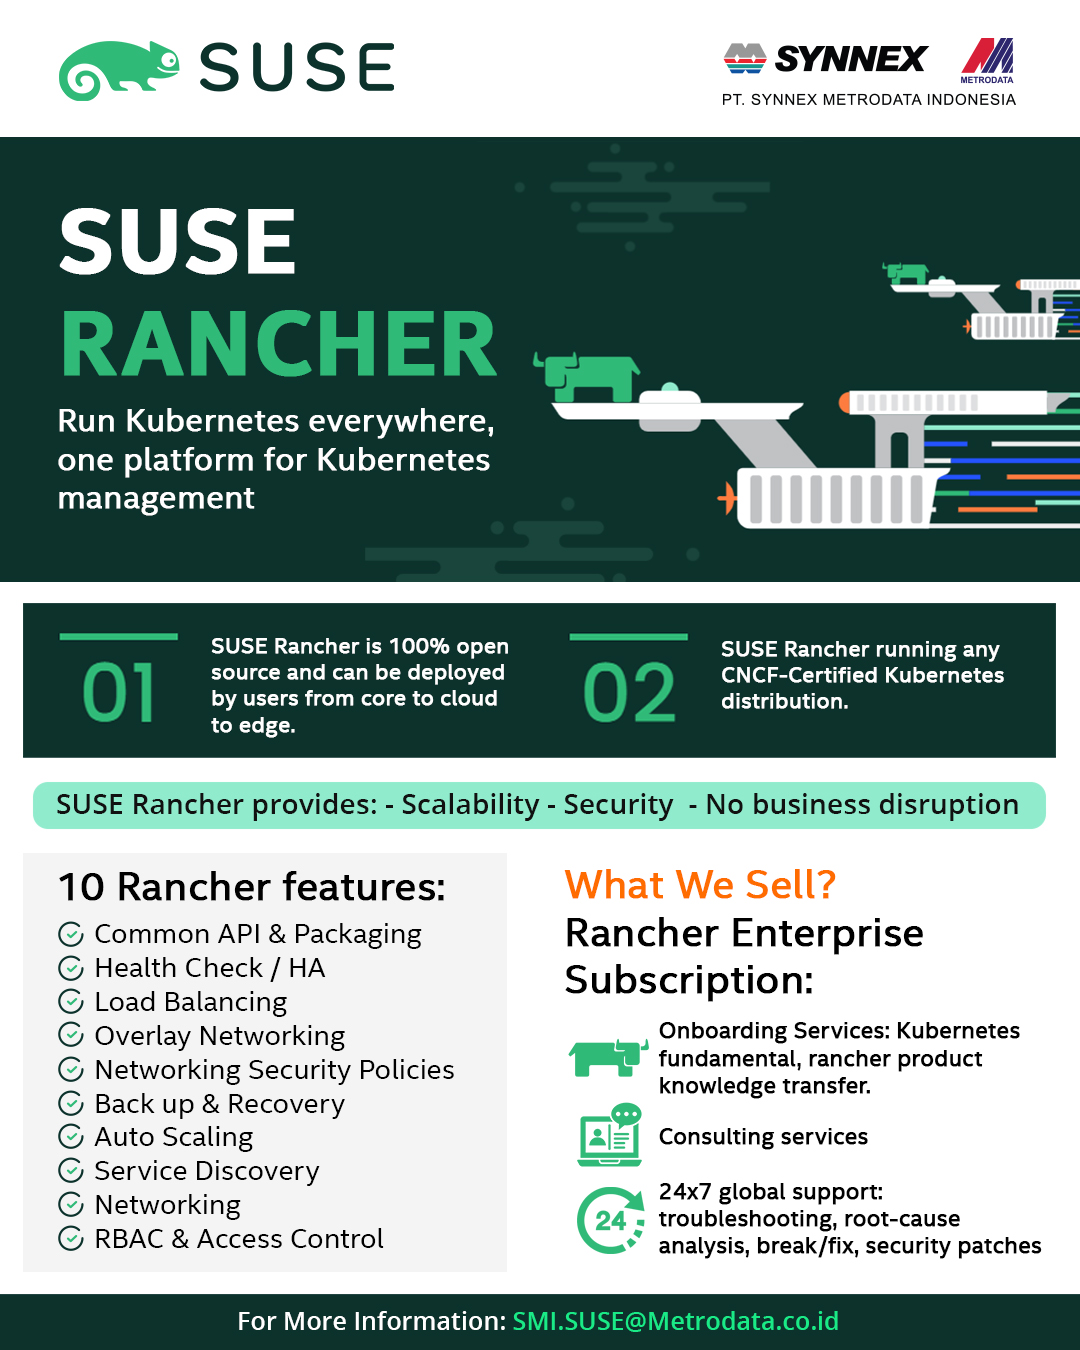 Let’s Know More about SUSE Rancher